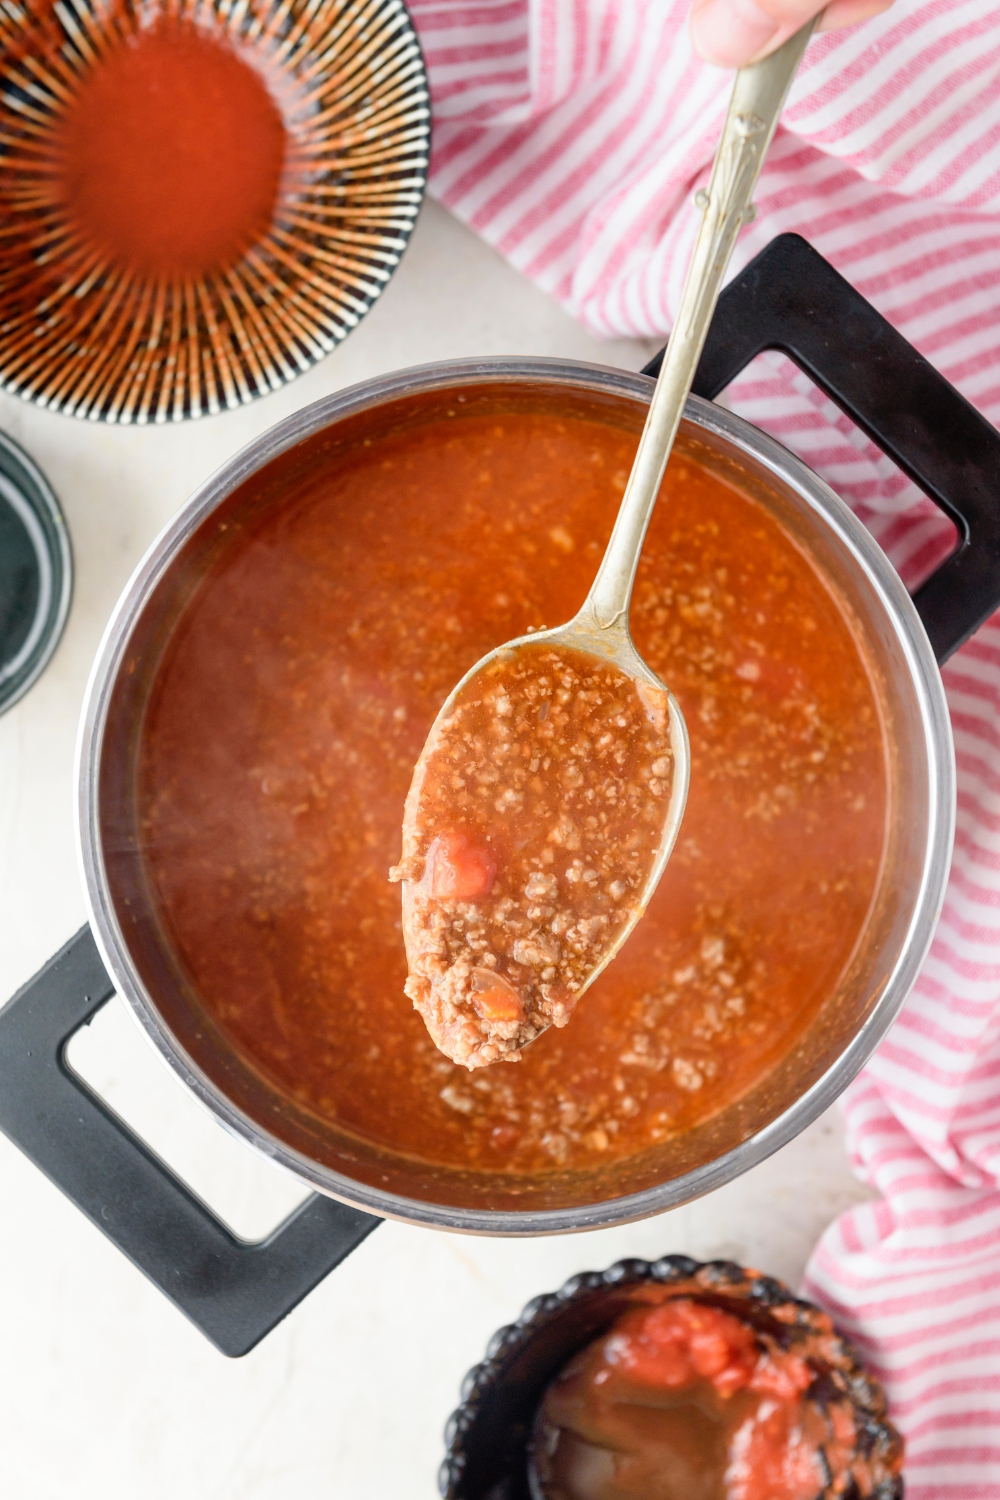 A spoonful of ground beef in tomato sauce held above a pot filled with more ground beef and sauce.